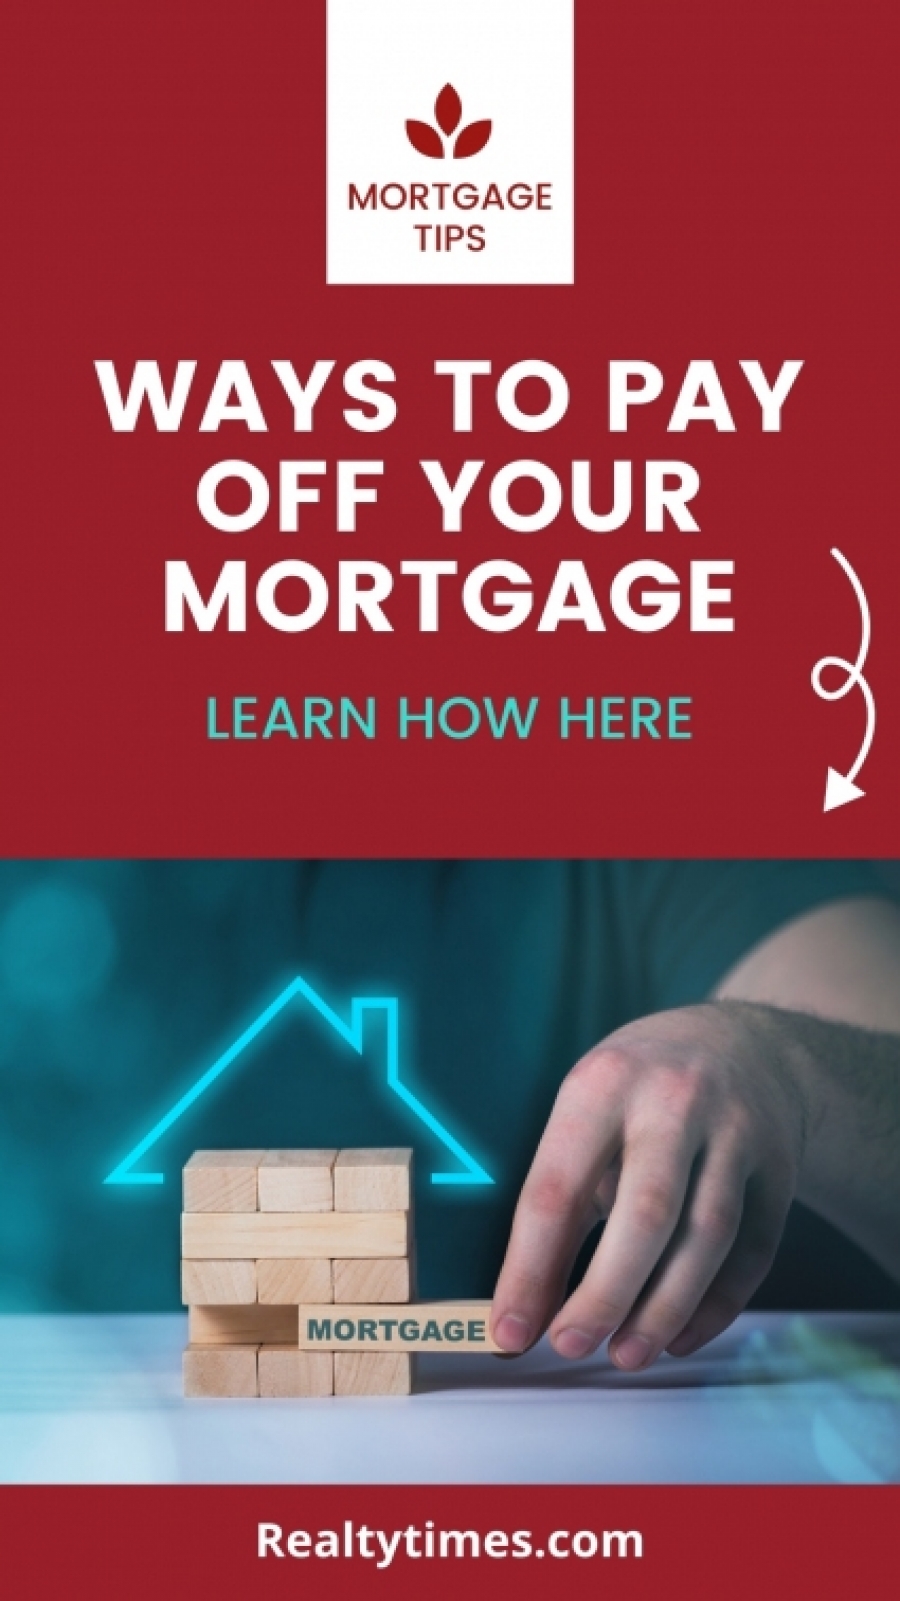 How Can You Pay Off a Mortgage Early?